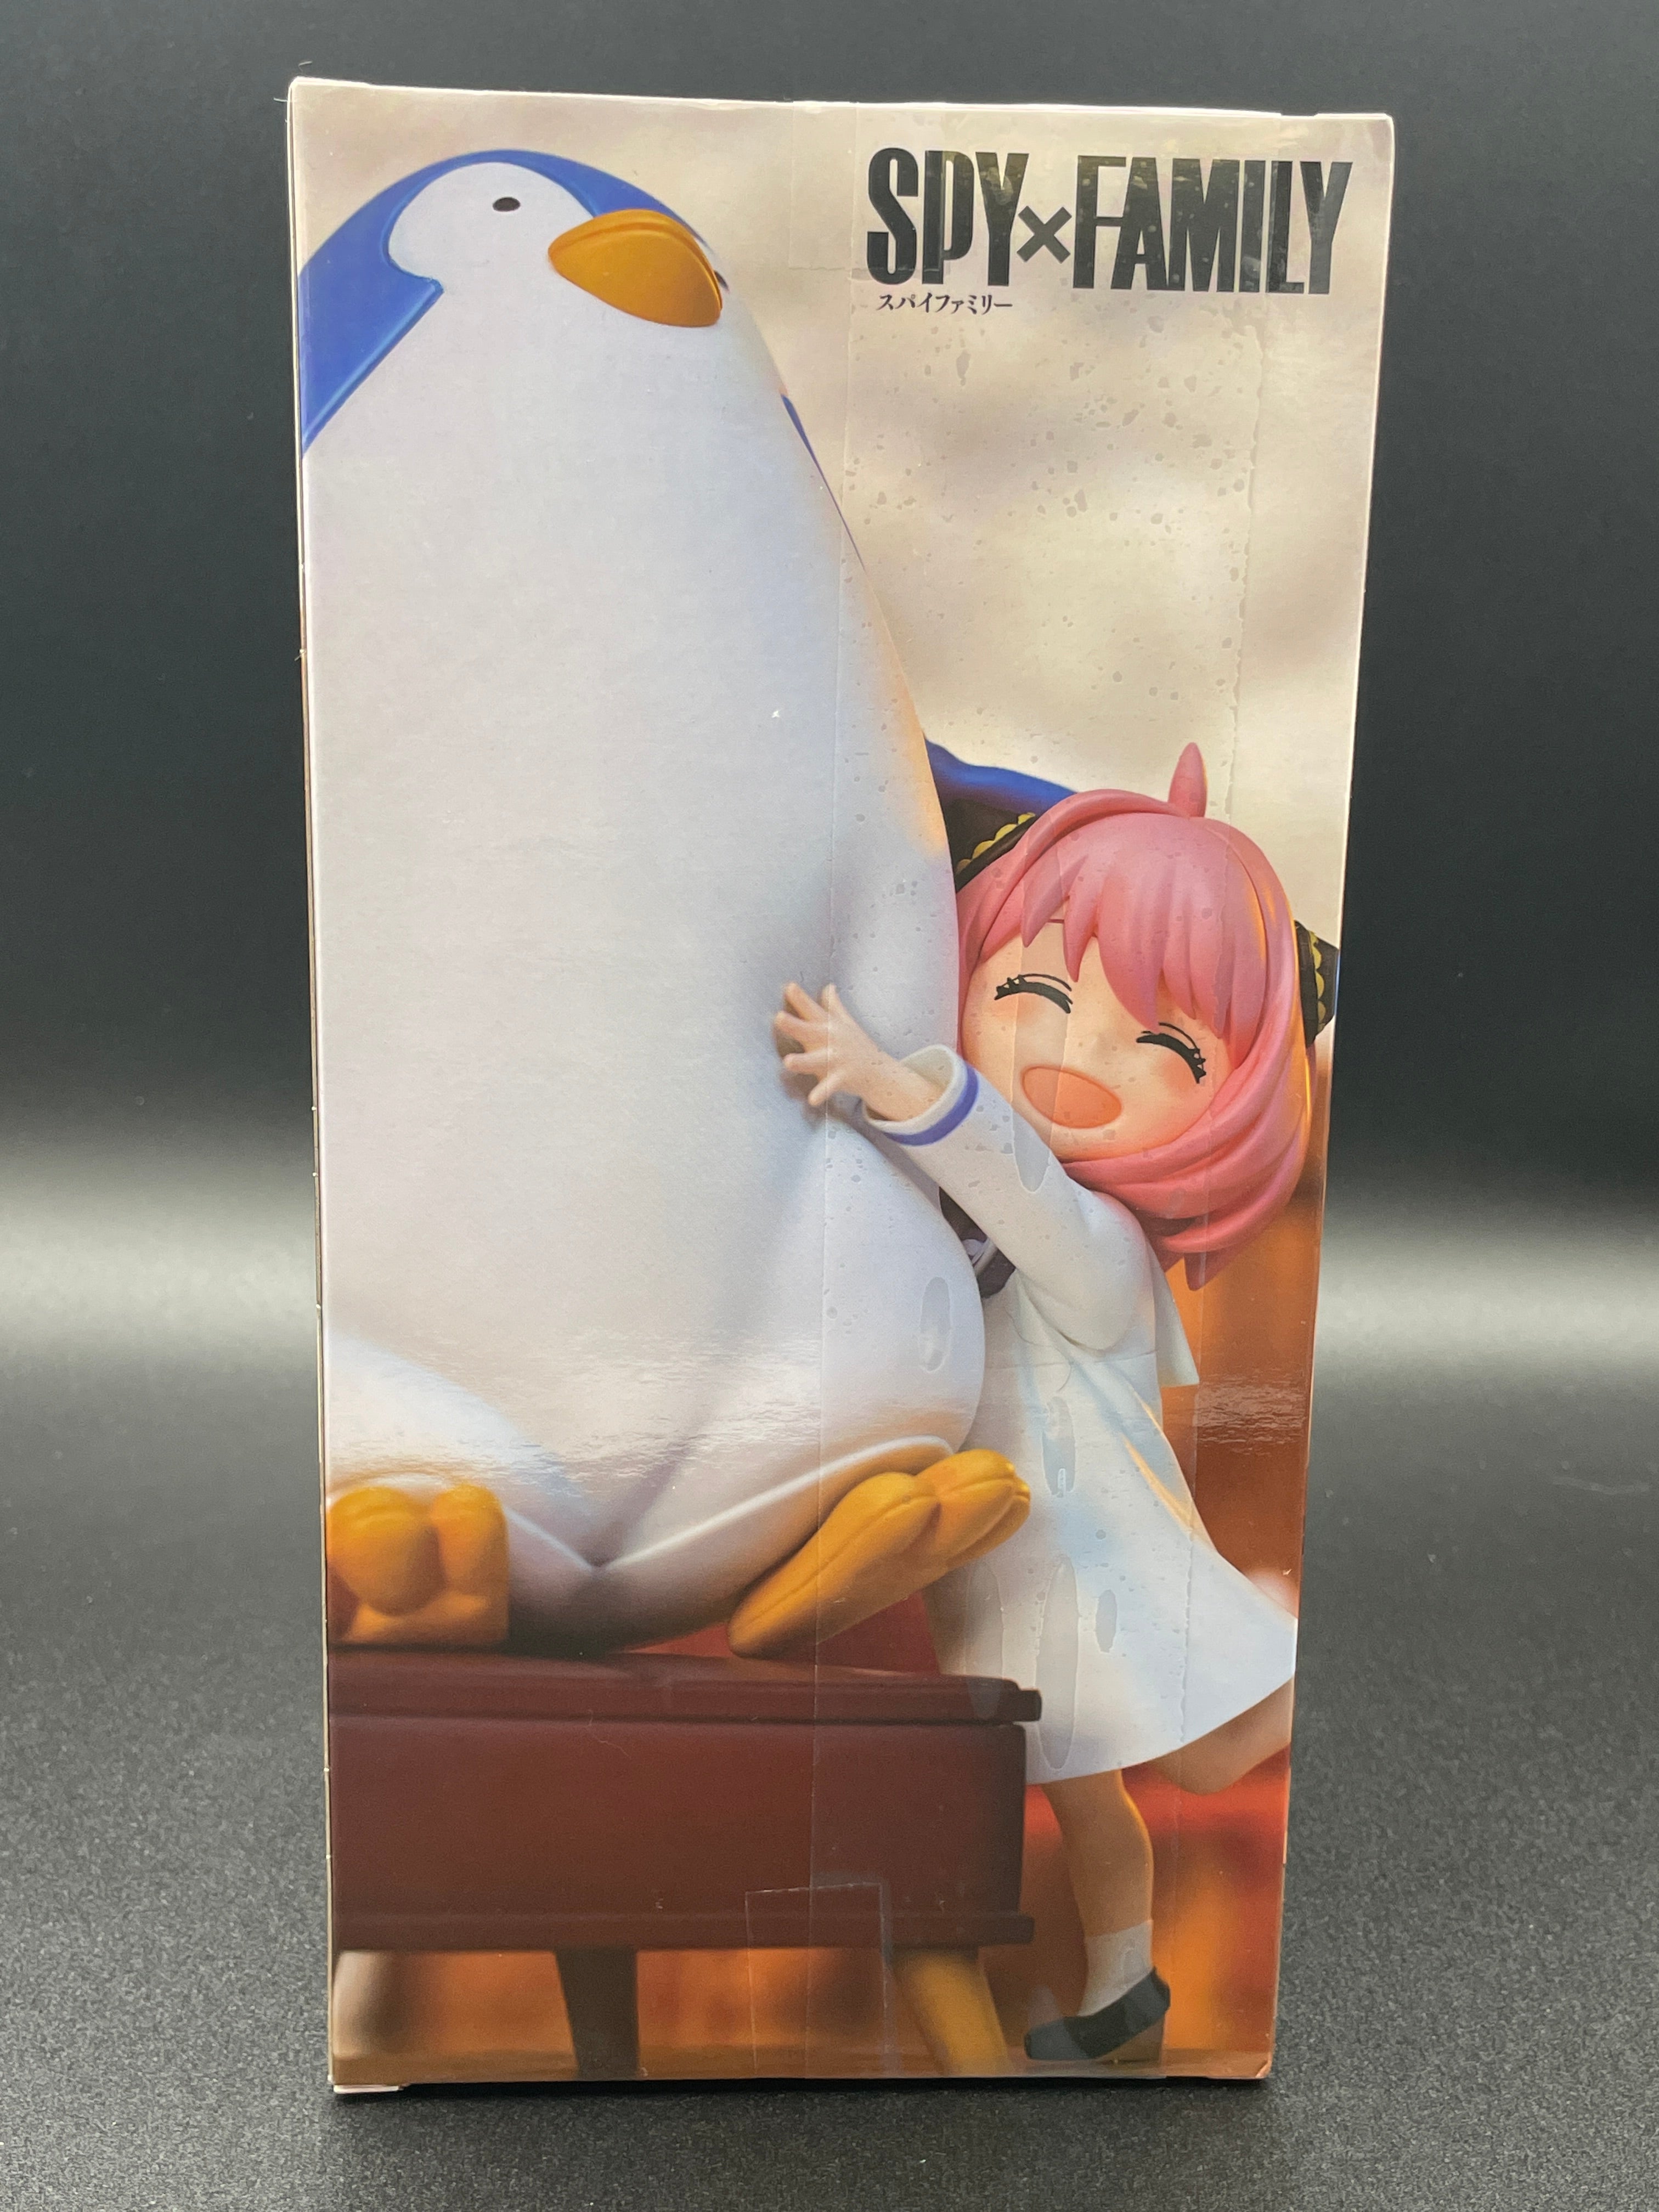 Furyu Spy X Family Anya Forger And Penguin Exceed Creative Figurine Imported